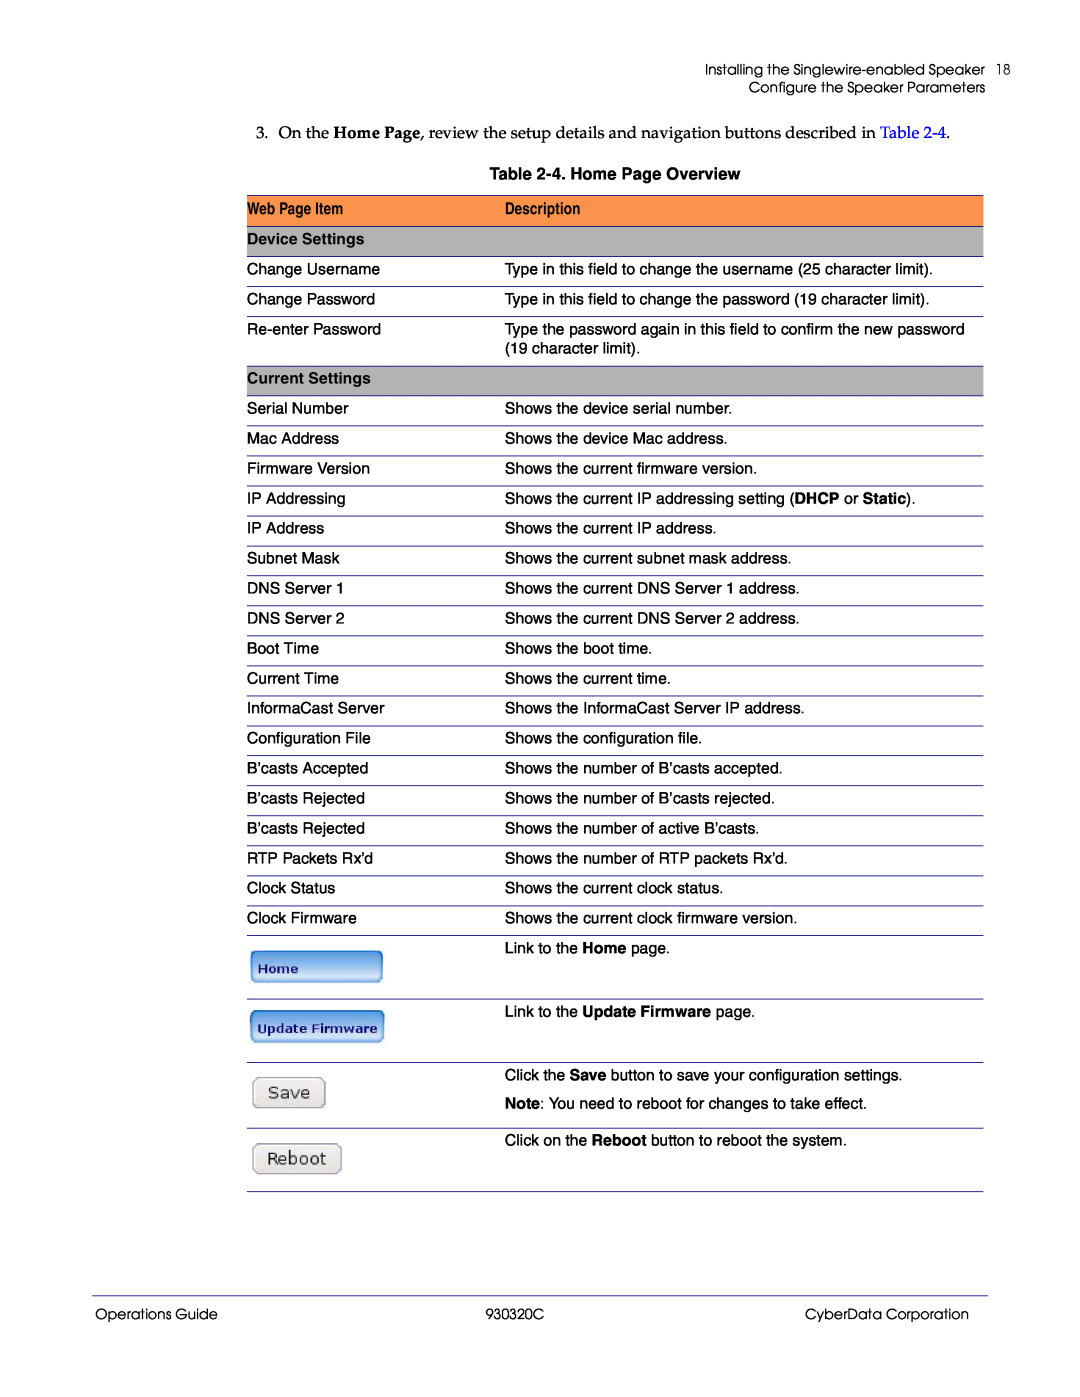 CyberData 11103 manual 4.Home Page Overview, Web Page Item, Description, Device Settings, Current Settings 